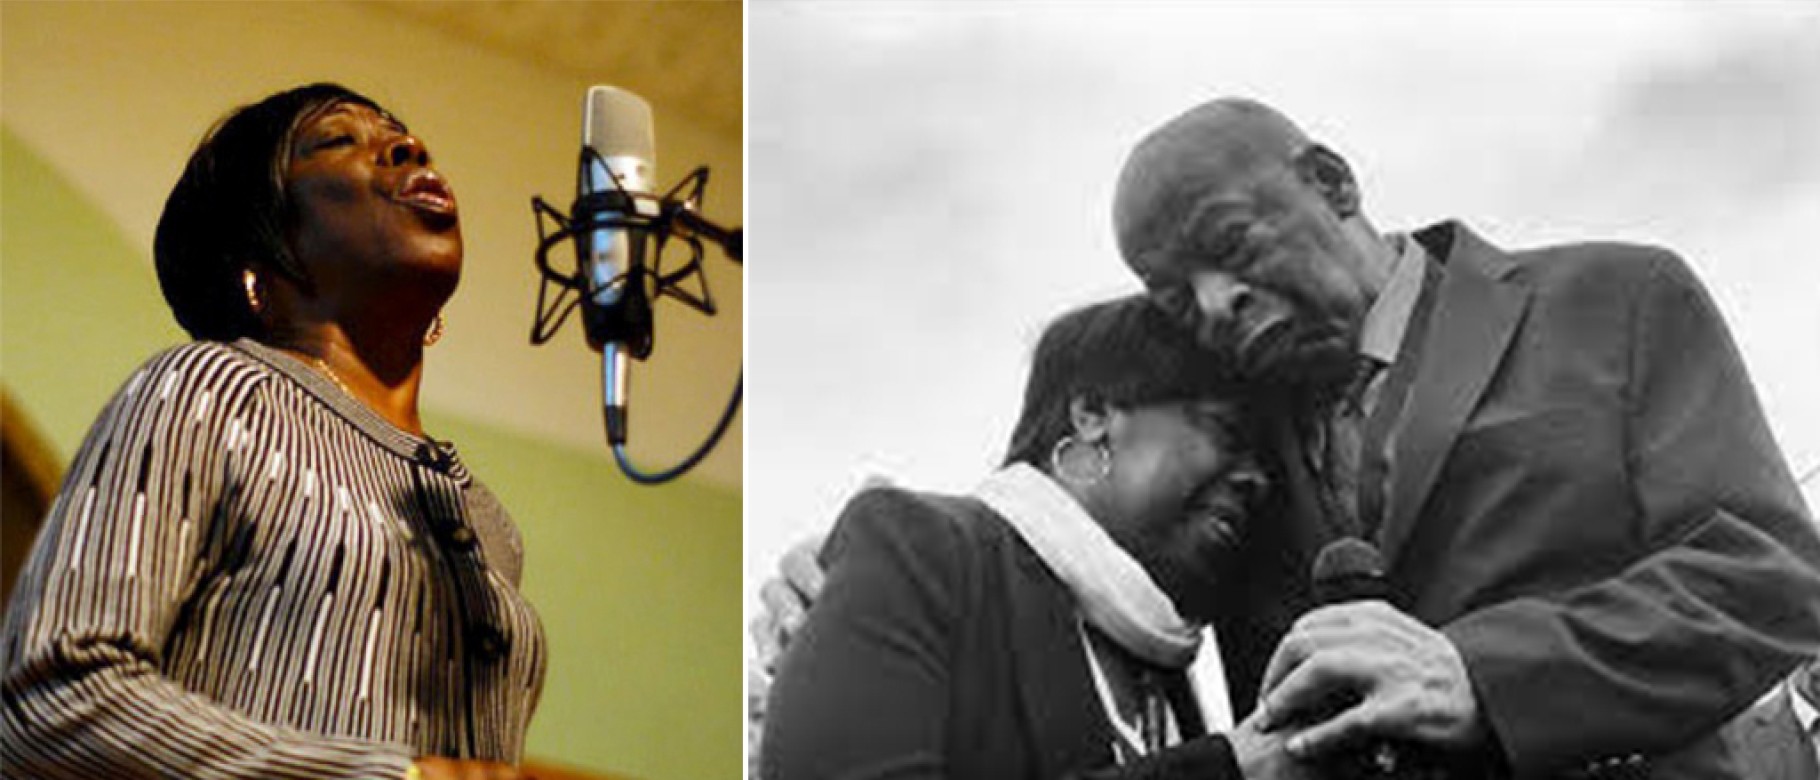 A composite of two images featuring, at left, Bettie Mae Fikes singing into a microphone and, at right, a black and white image of her embracing Martin Luther King Jr.